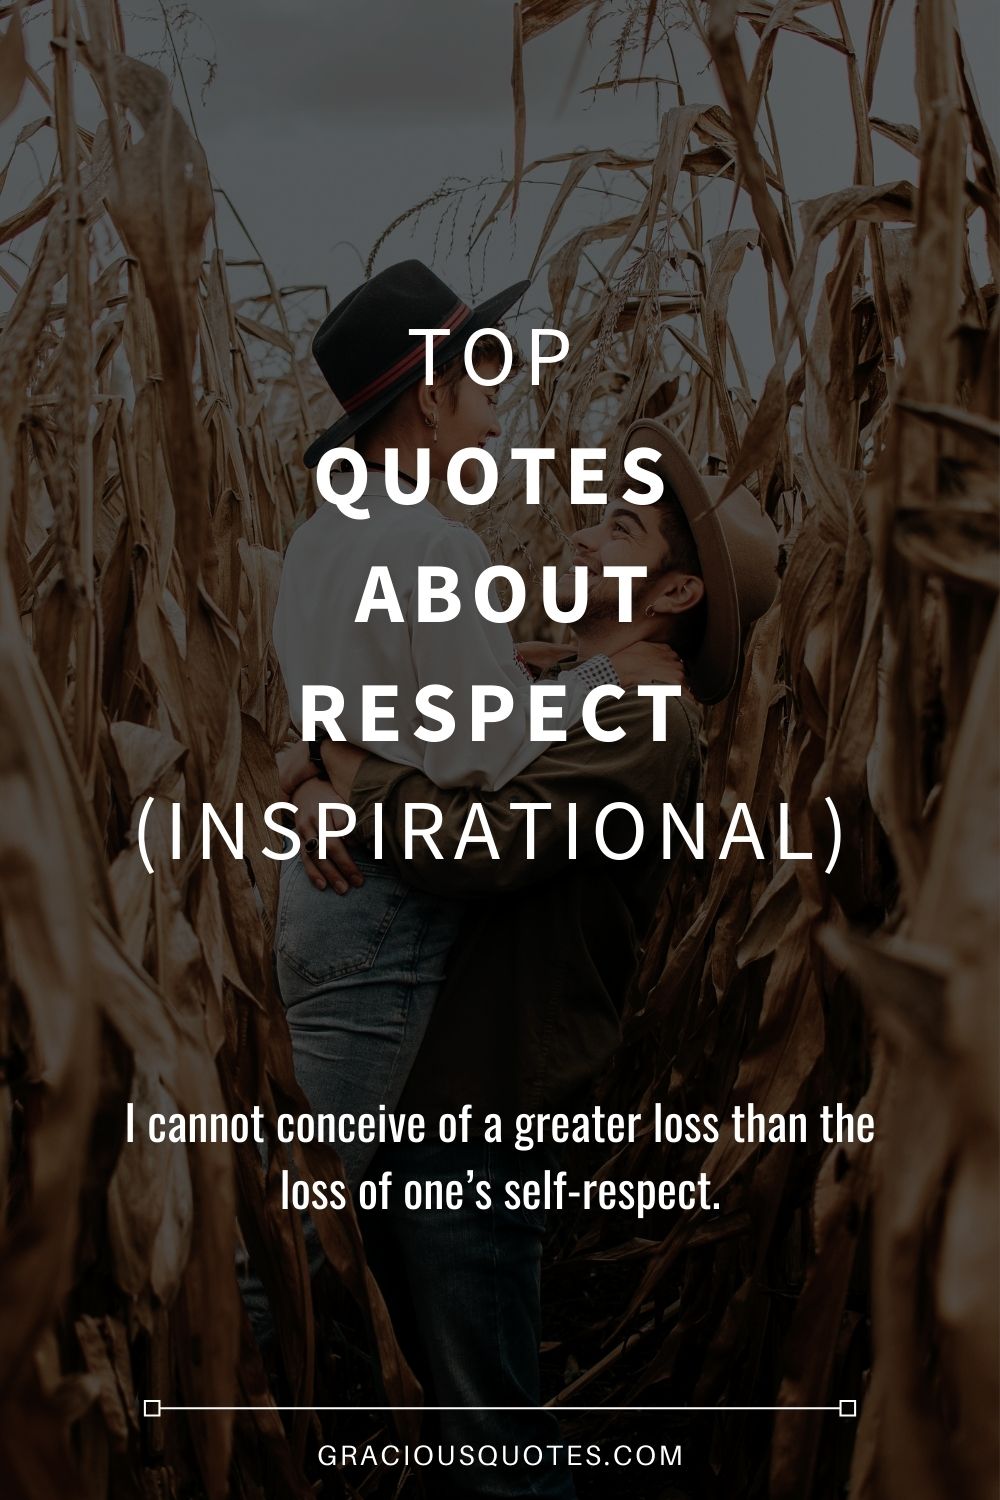 Top Quotes About Respect (INSPIRATIONAL) - Gracious Quotes